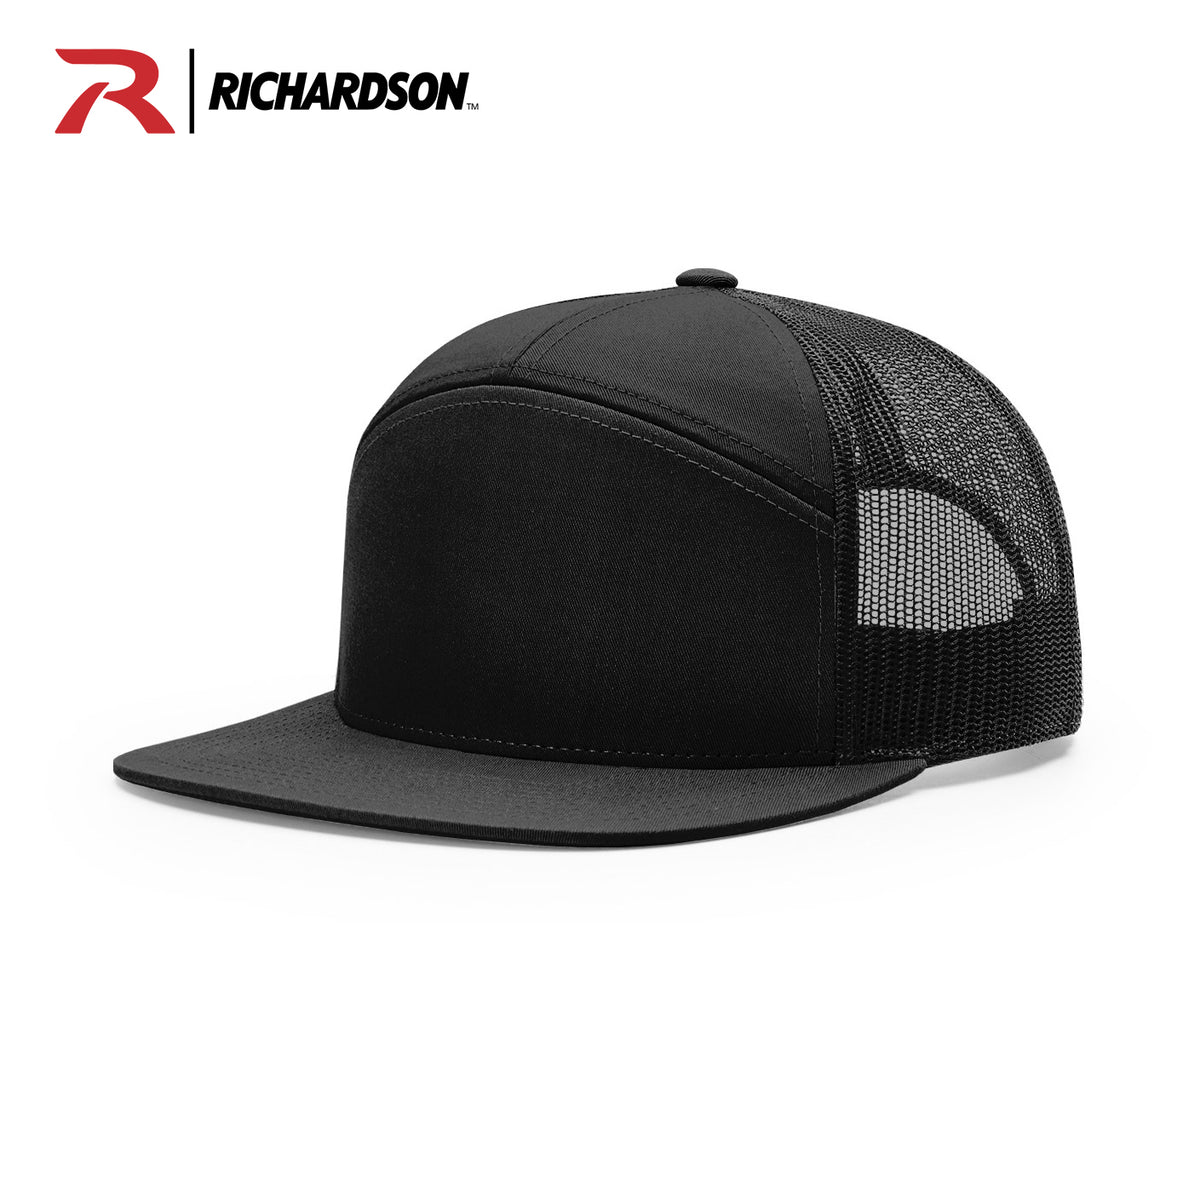 FLAT BILL Custom Leather Patch Hats, Laser Engraved Logo on Leather Patch  Hat for Your Business or Organization 7 PANEL 